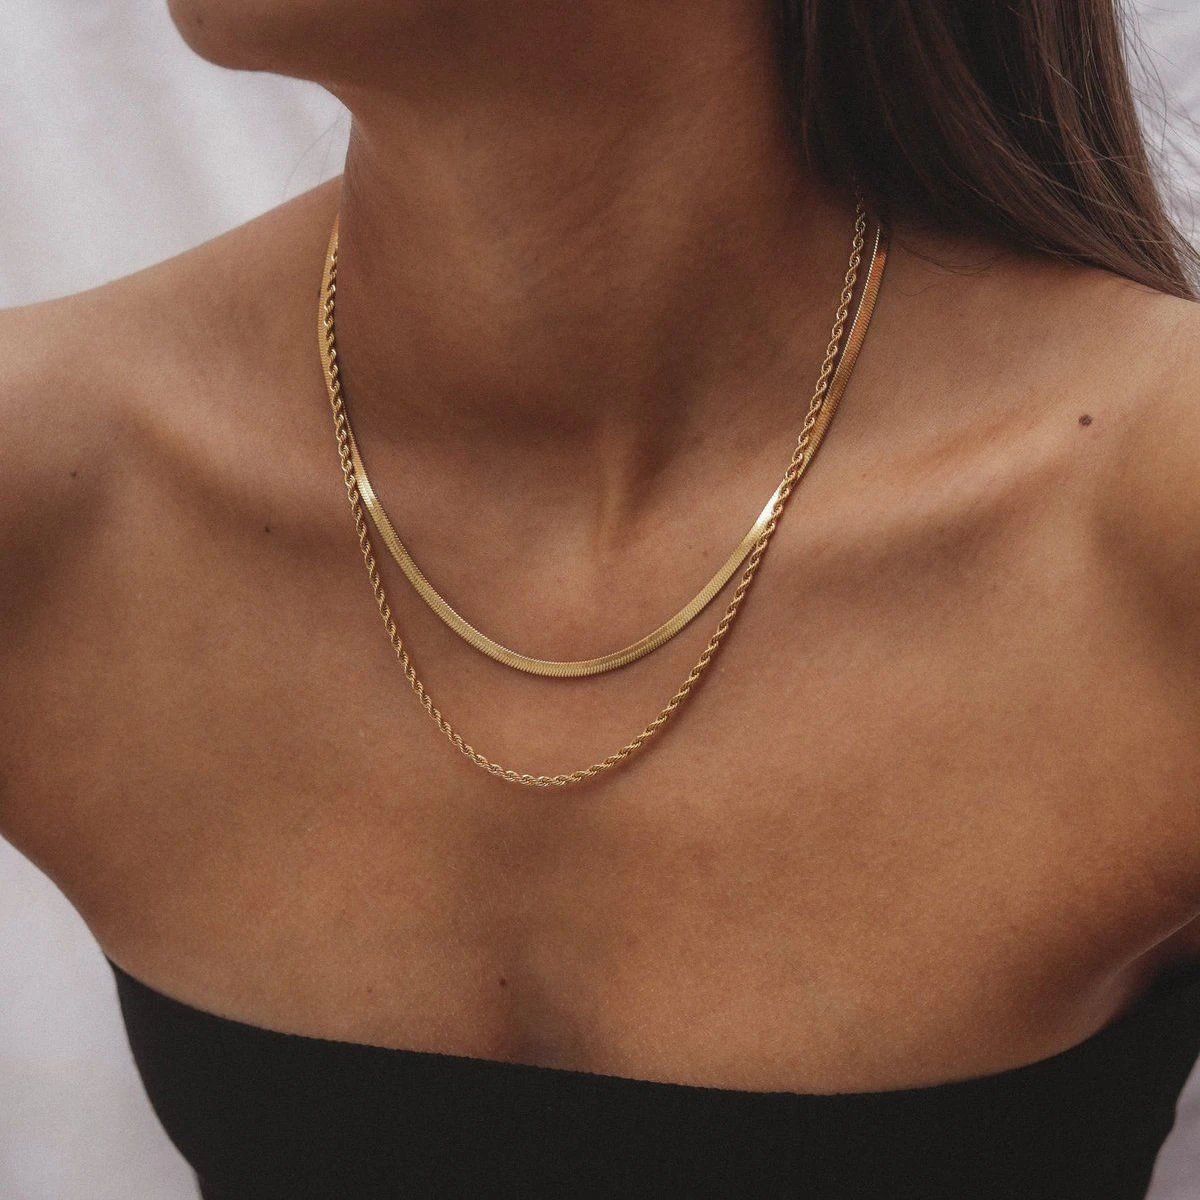 

Dainty Stainless Steel Jewelry 18k Gold Plated Twisted Rope Chain Necklace Layered Double Snake Chain Choker Necklace